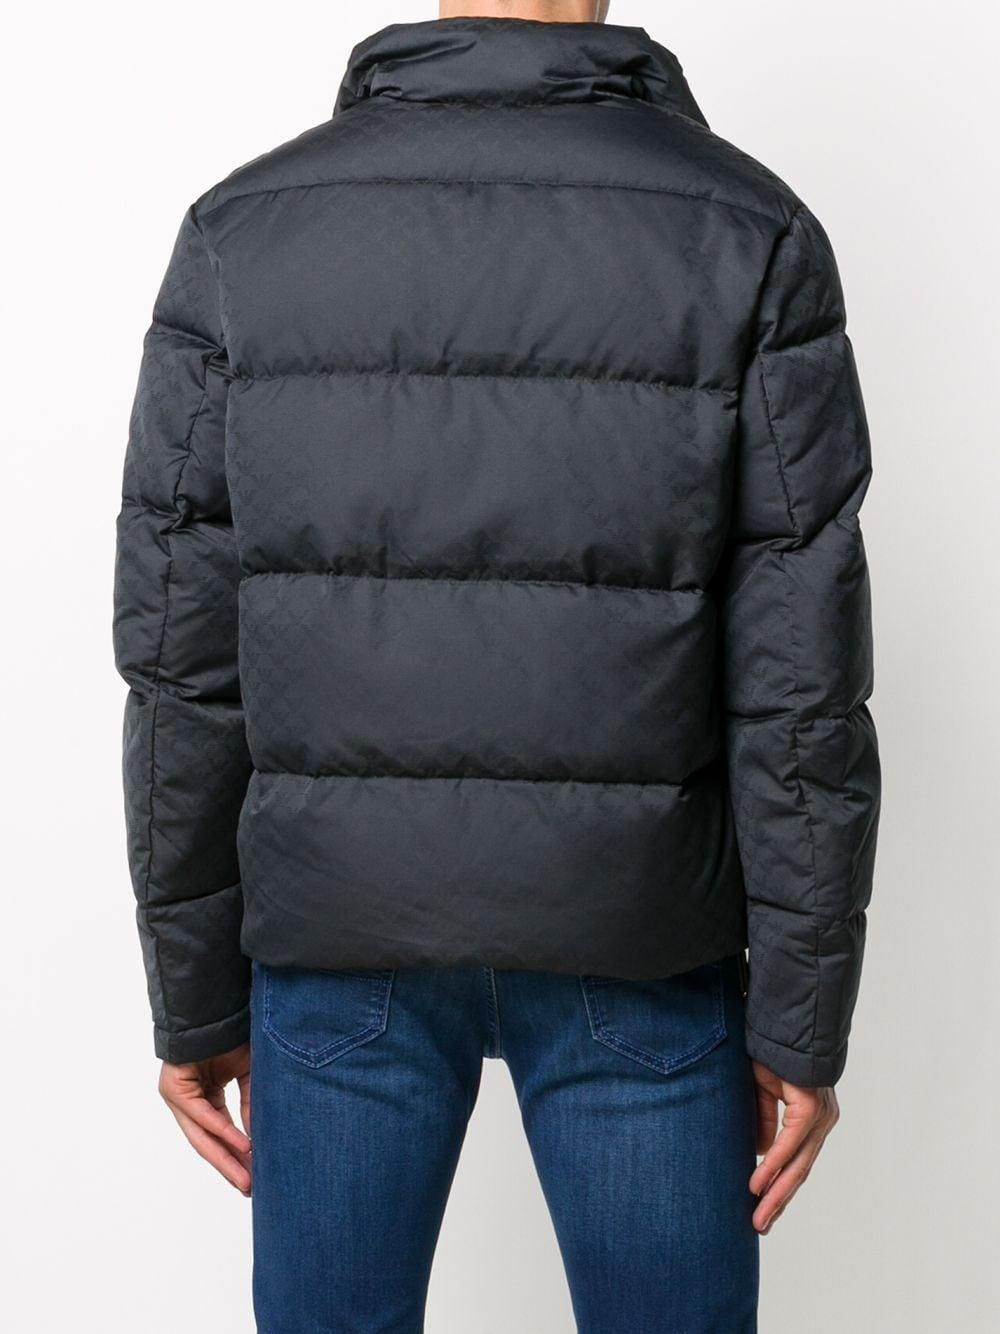 Emporio Armani Synthetic Puffer Down Jacket in Blue for Men - Lyst